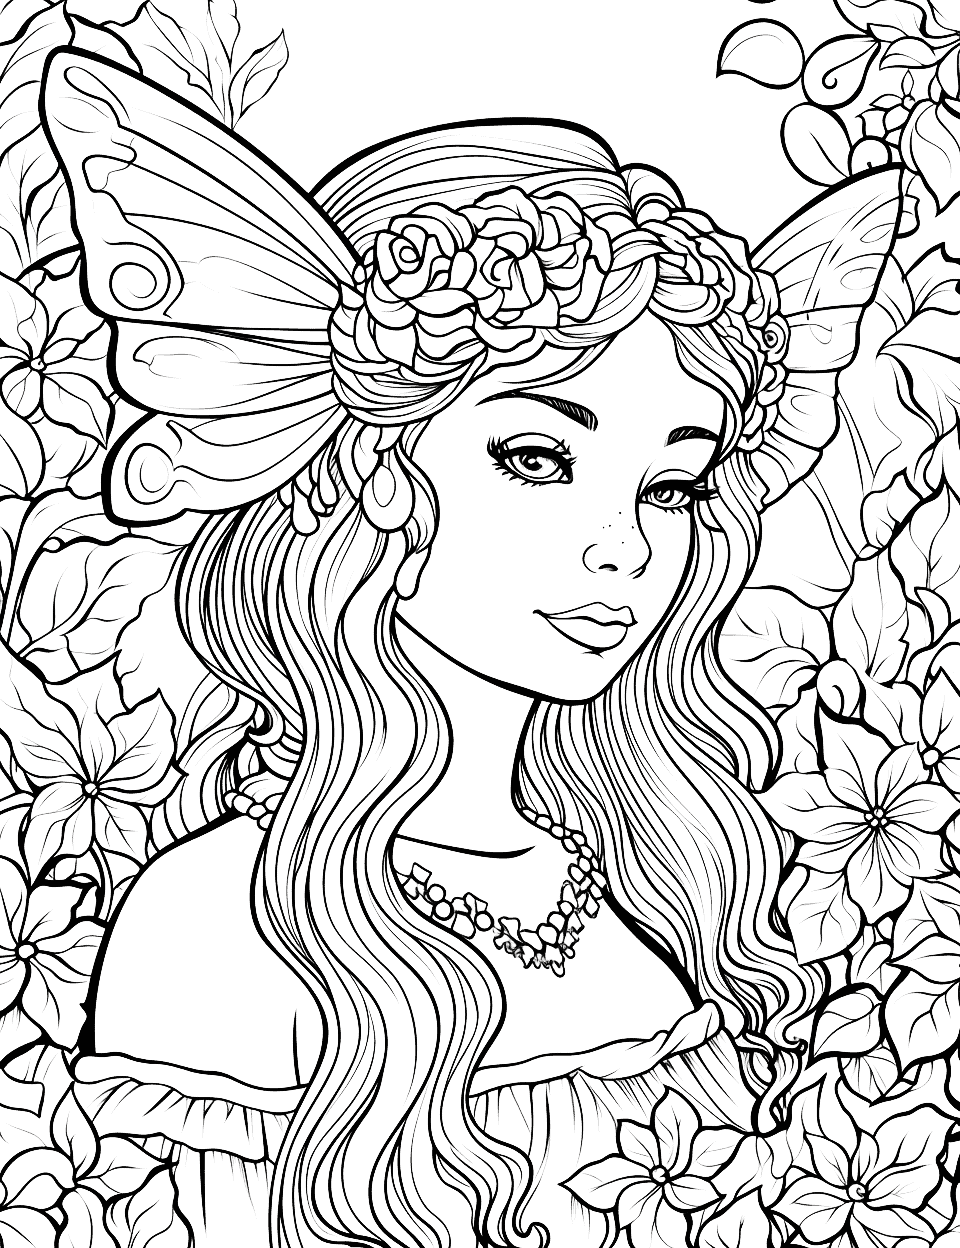 Enchanted Forest Fairy Adult Coloring Page - A detailed scene of a fairy in an enchanted forest.